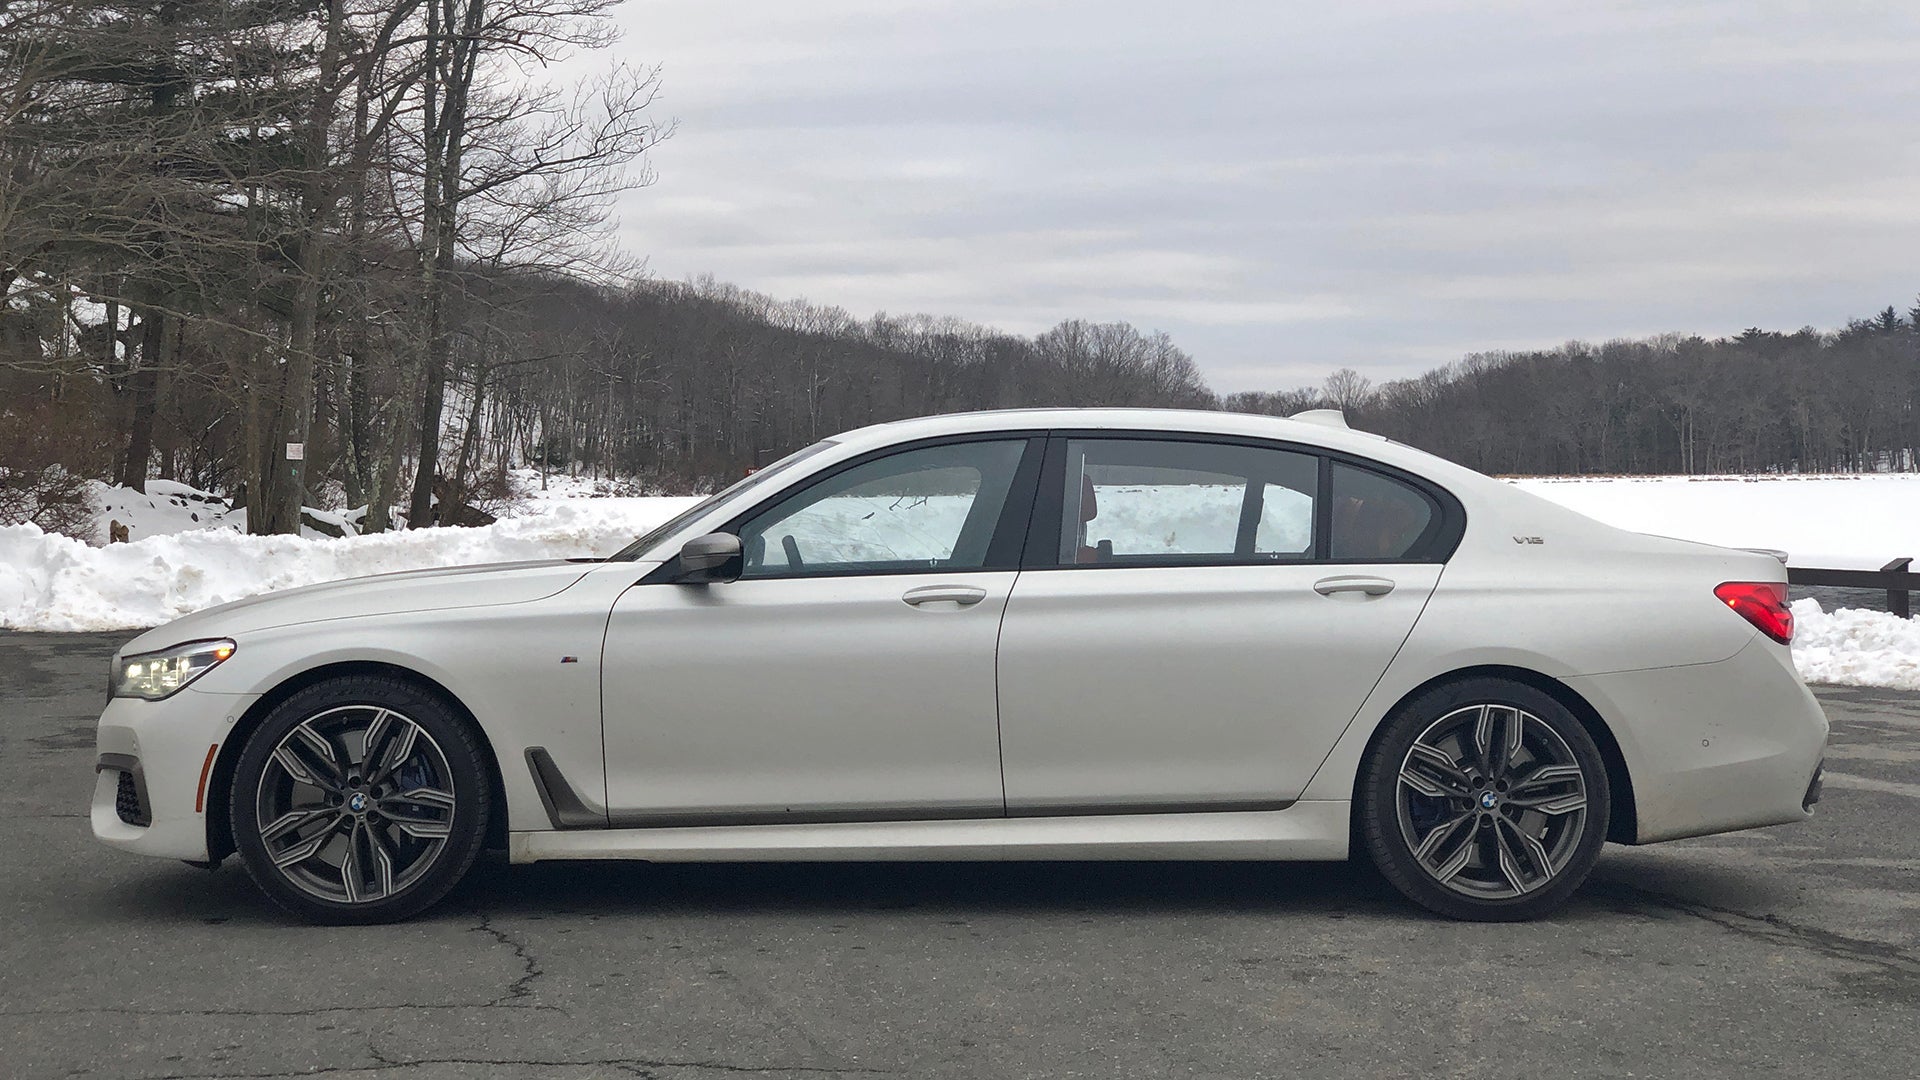 2018 BMW M760i xDrive Review: Is This $180,000 Super Sedan Fancy Enough to  Justify the Price?